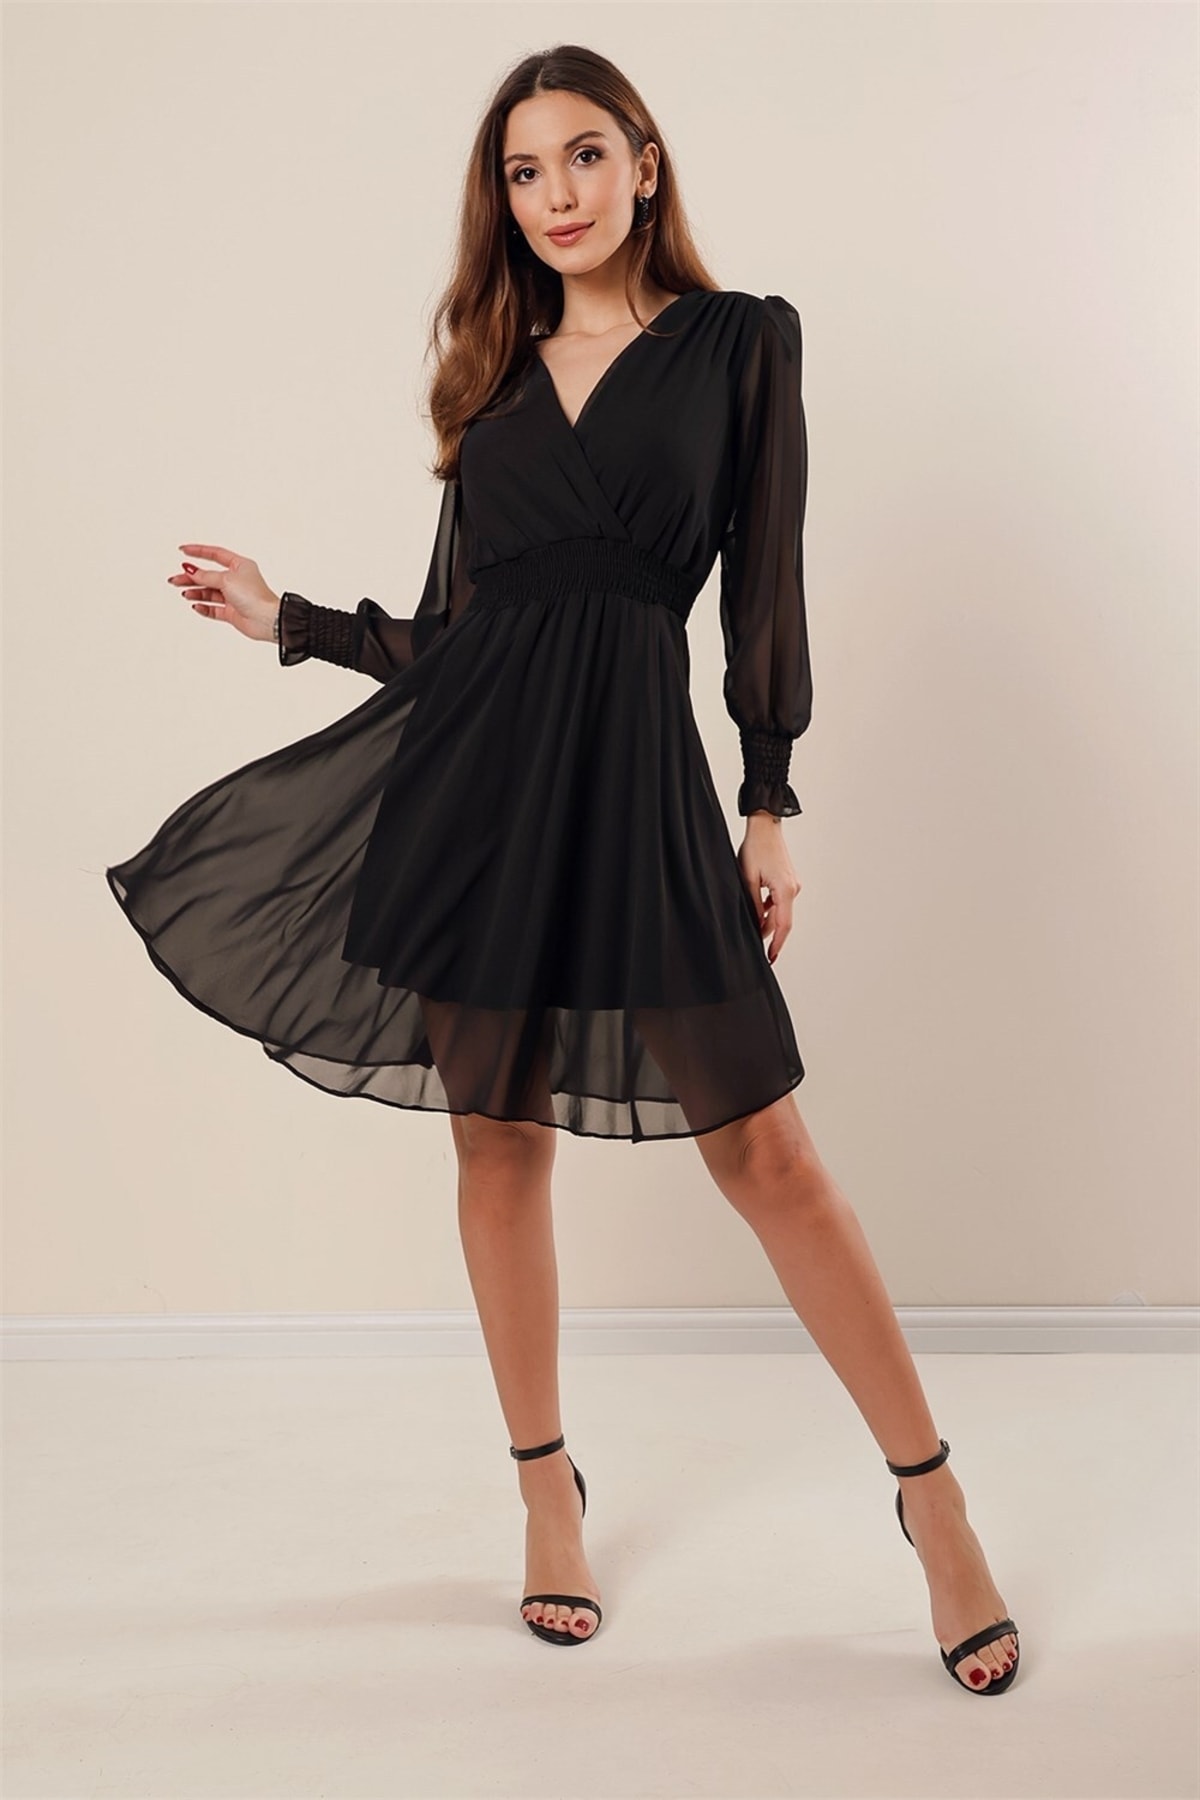 Levně By Saygı Double Breasted Collar Waist And Sleeve Ends Guiped Lined Short Chiffon Dress